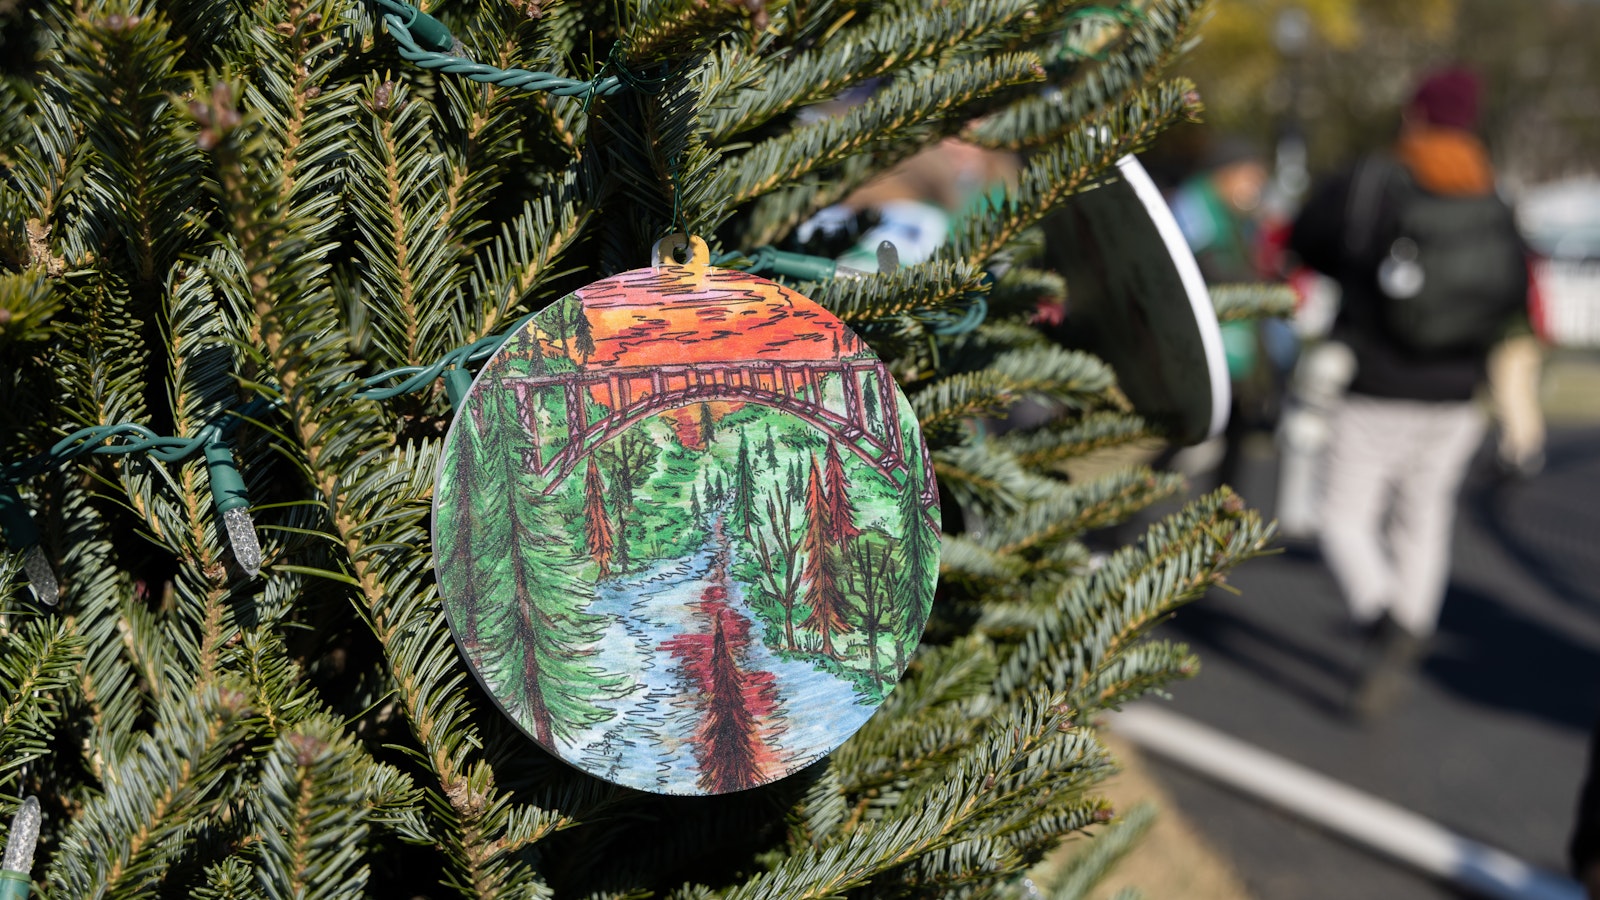 Volunteers decorate the West Virginia state Christmas tree with an ornament of the New River Gorge National Park and Preserve for the 2022 National Christmas Tree Lighting.